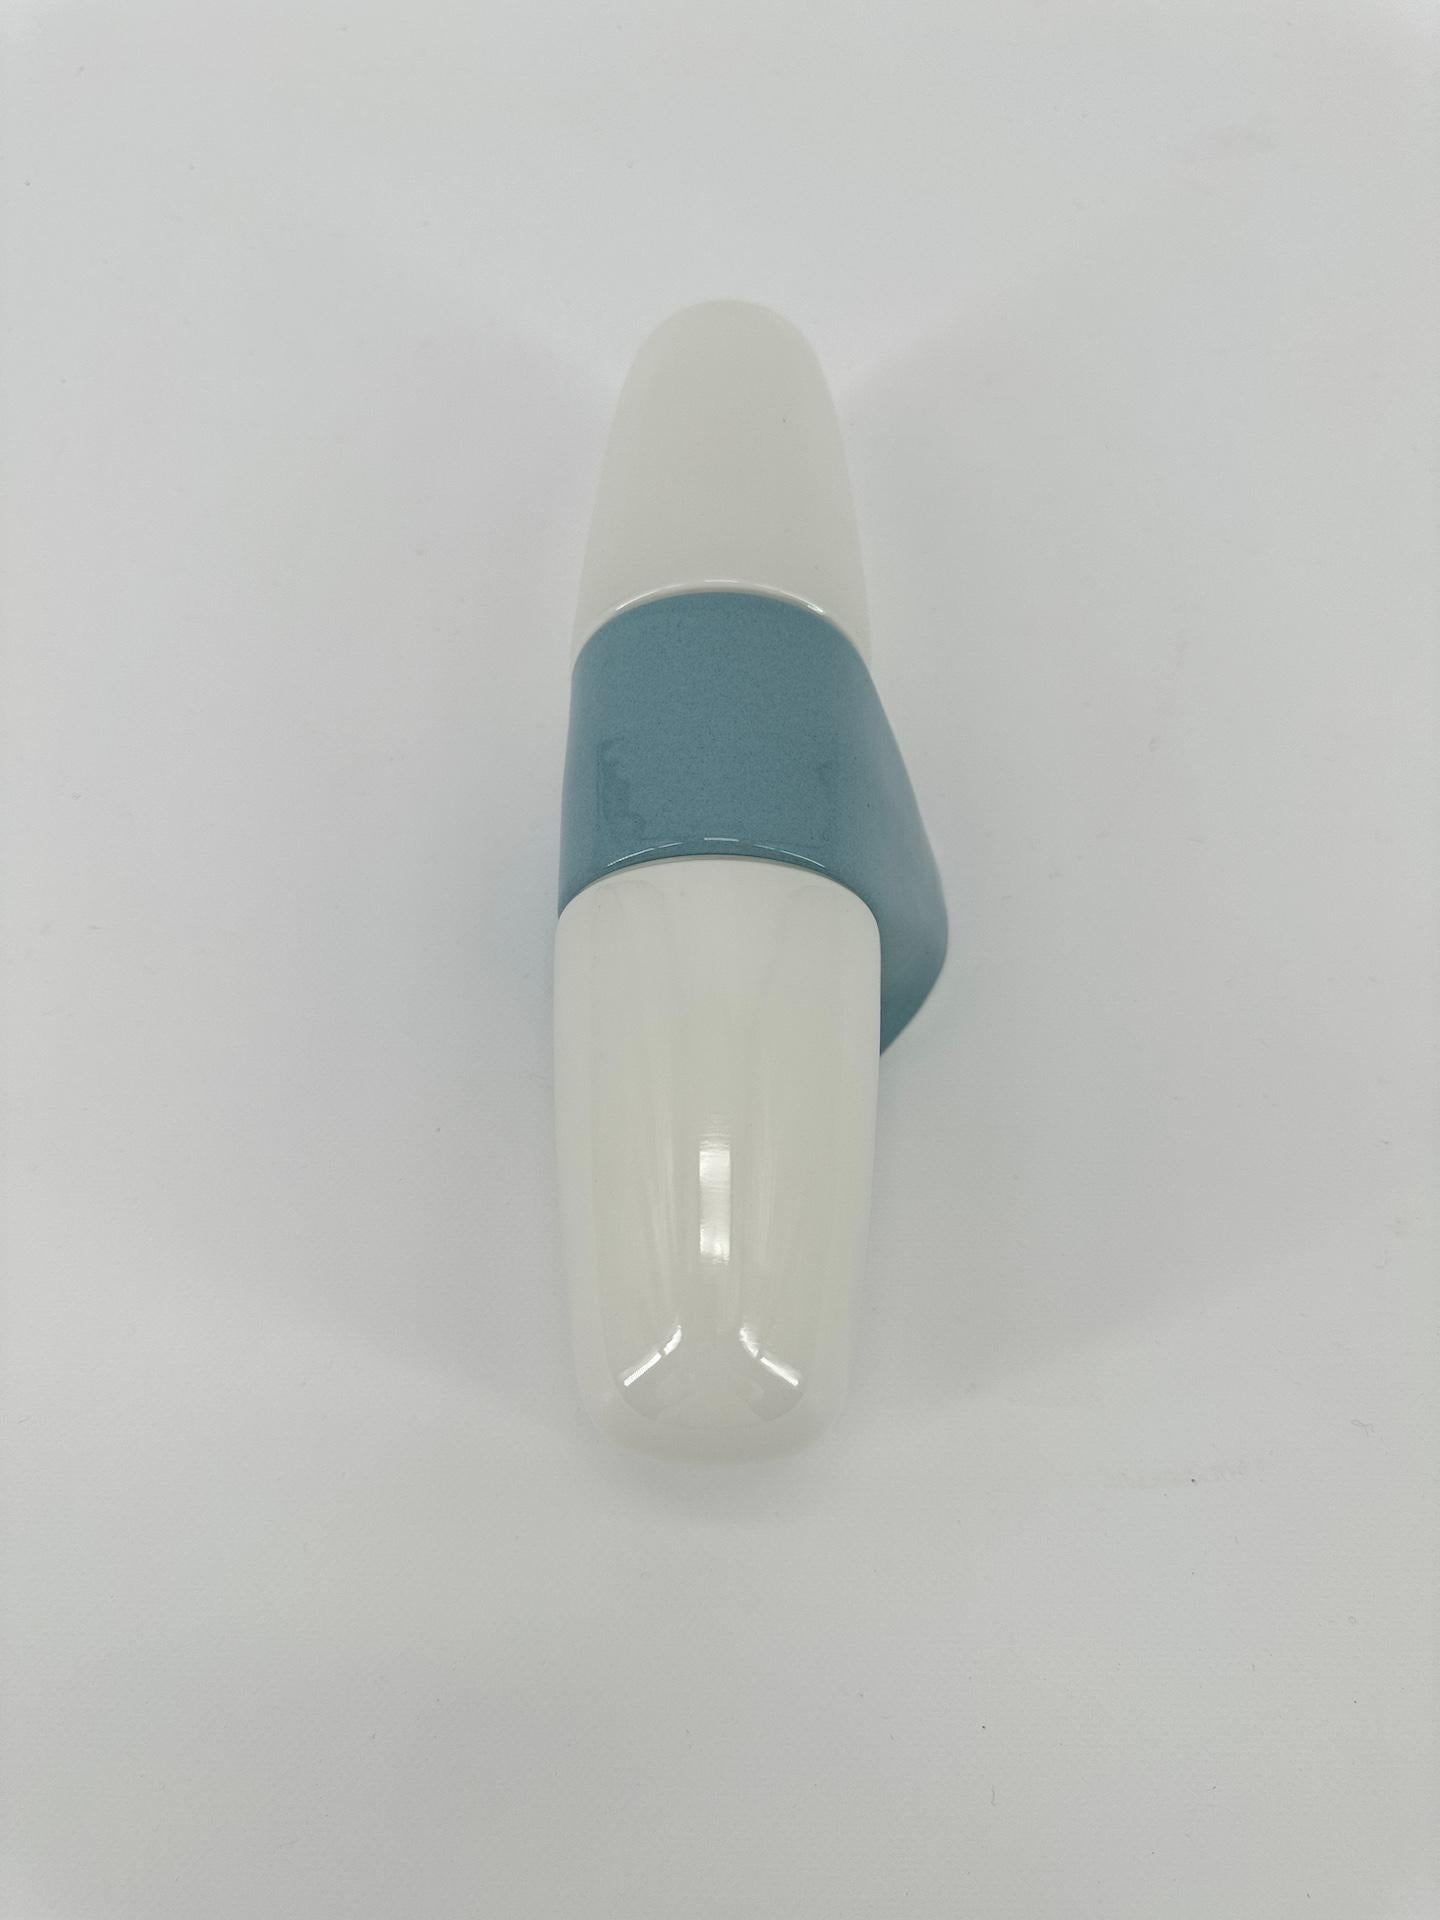 Mid-20th Century Blue Porcelain and Opalines Sconce By Wilhelm Wagenfeld For Lindner 1958 For Sale